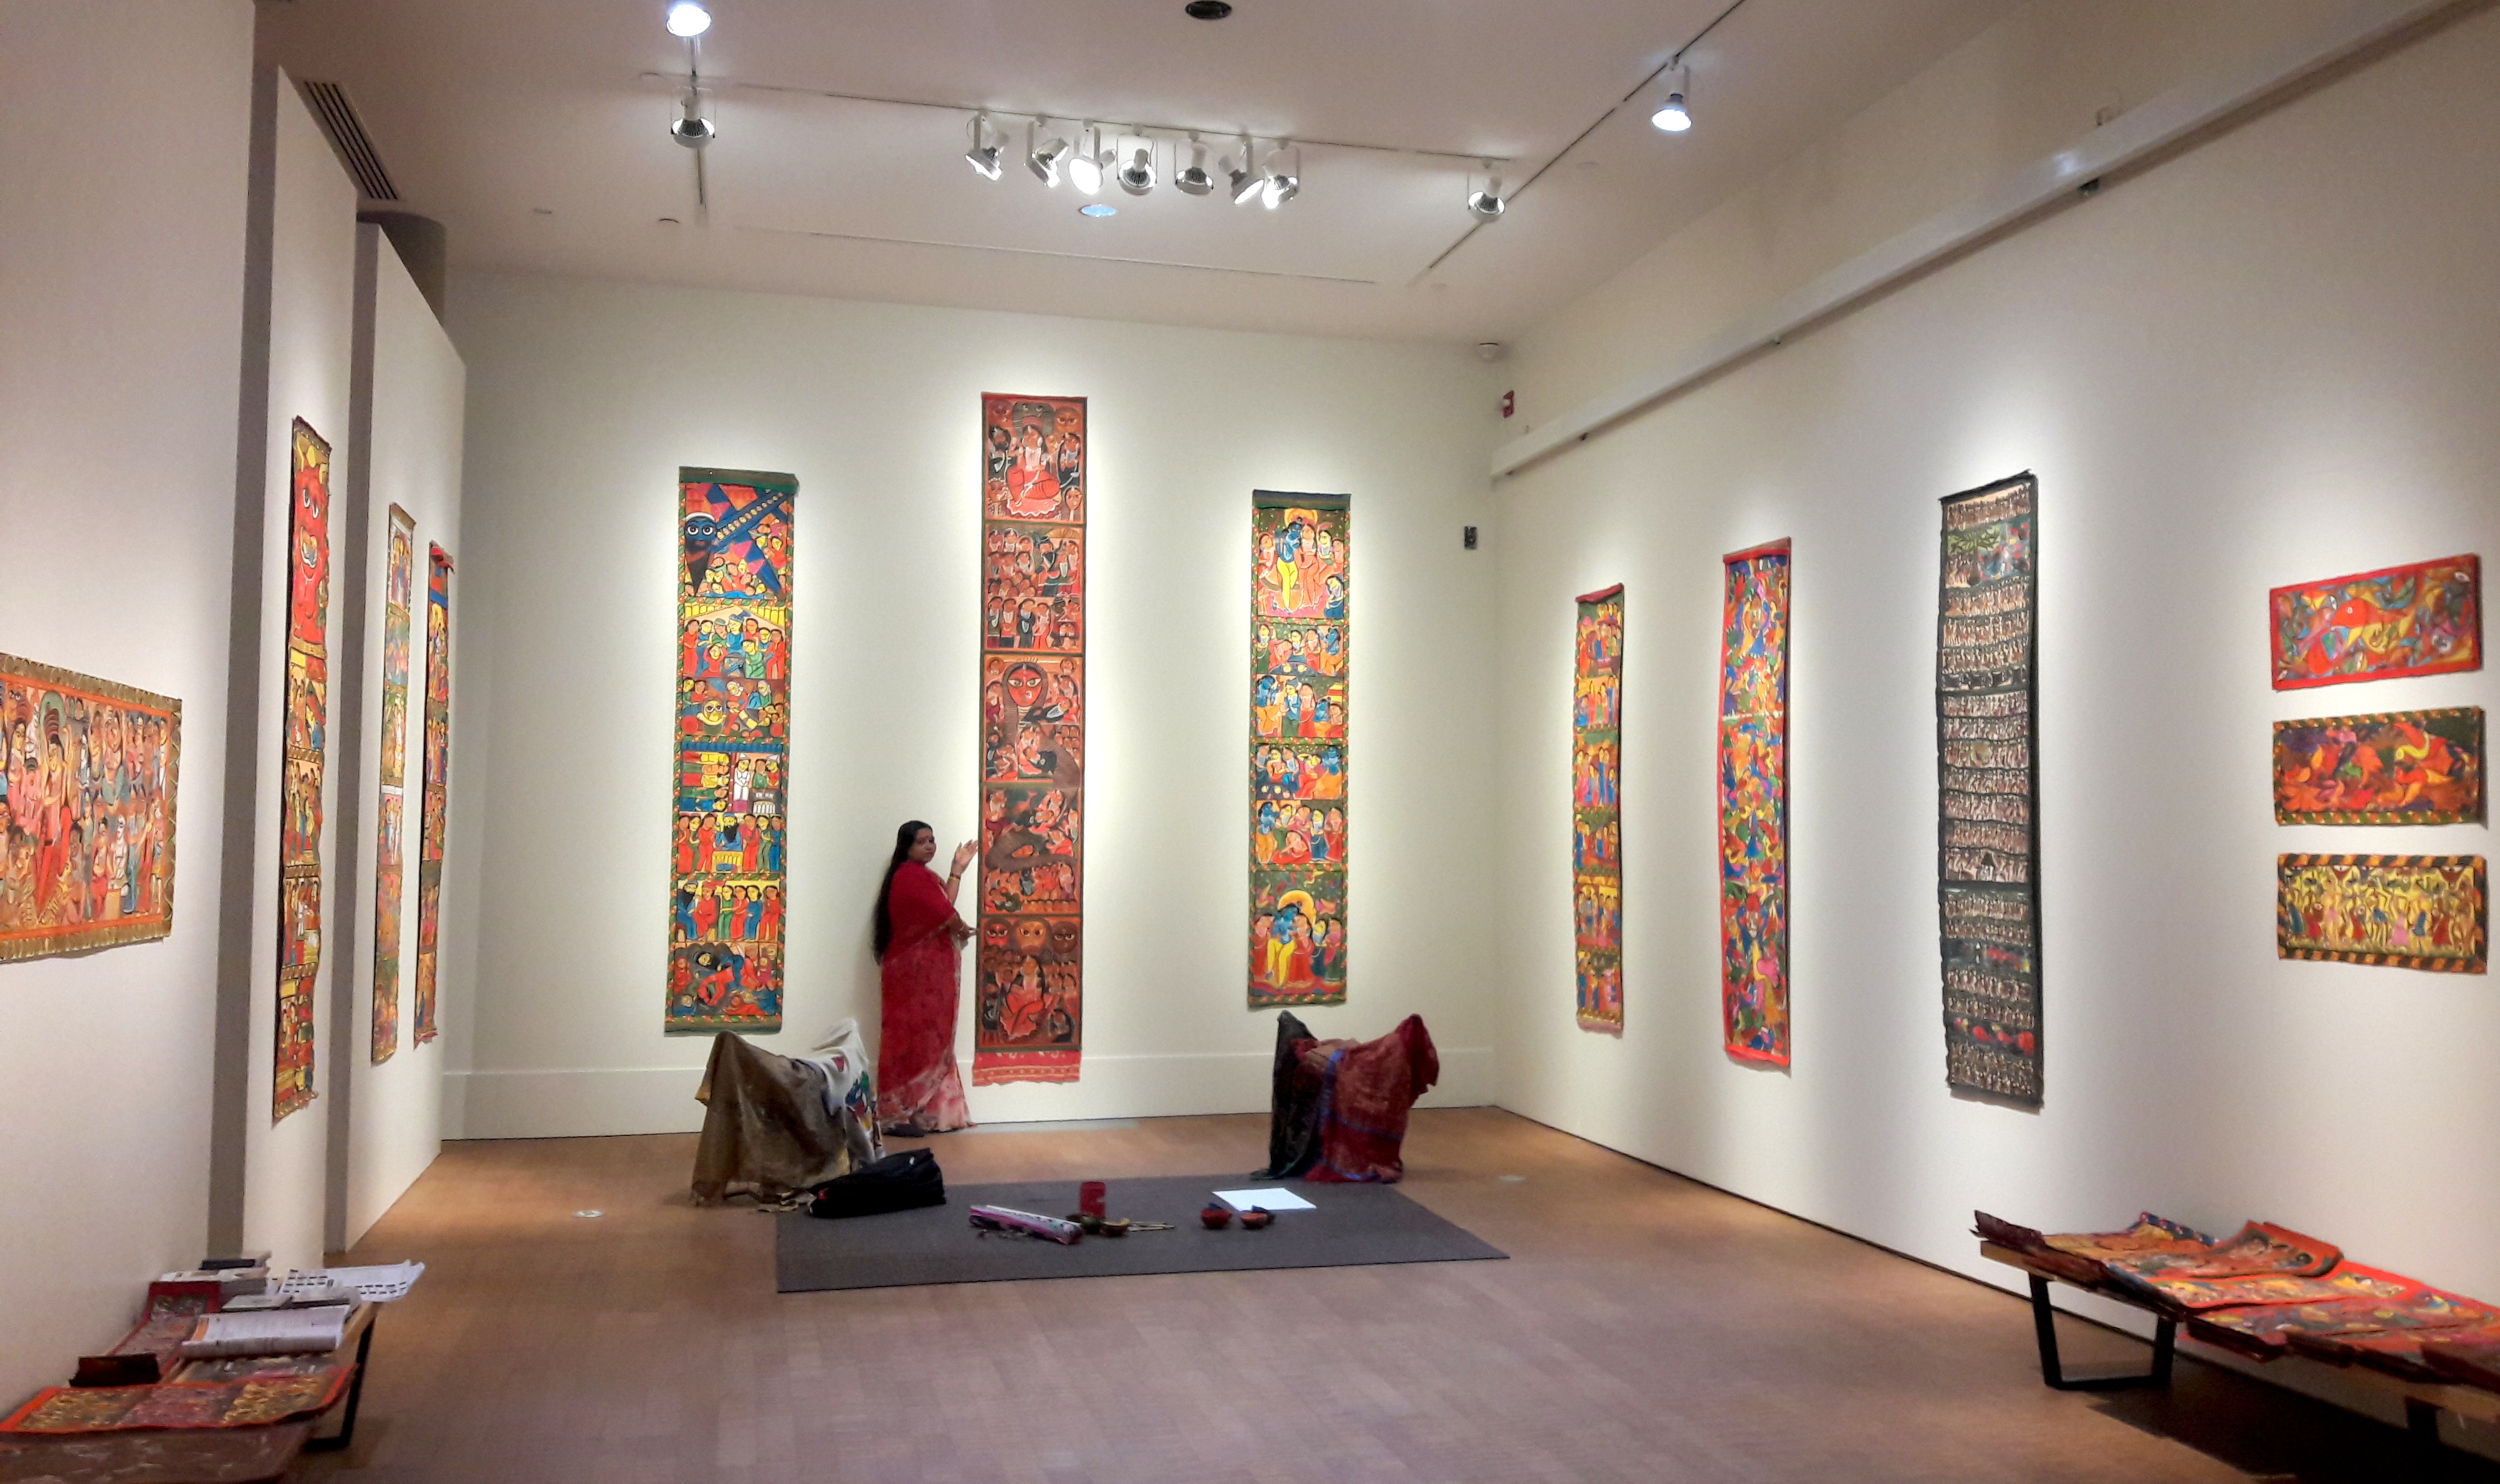 Exhibition of long scrolls at Grinell Collge, USA